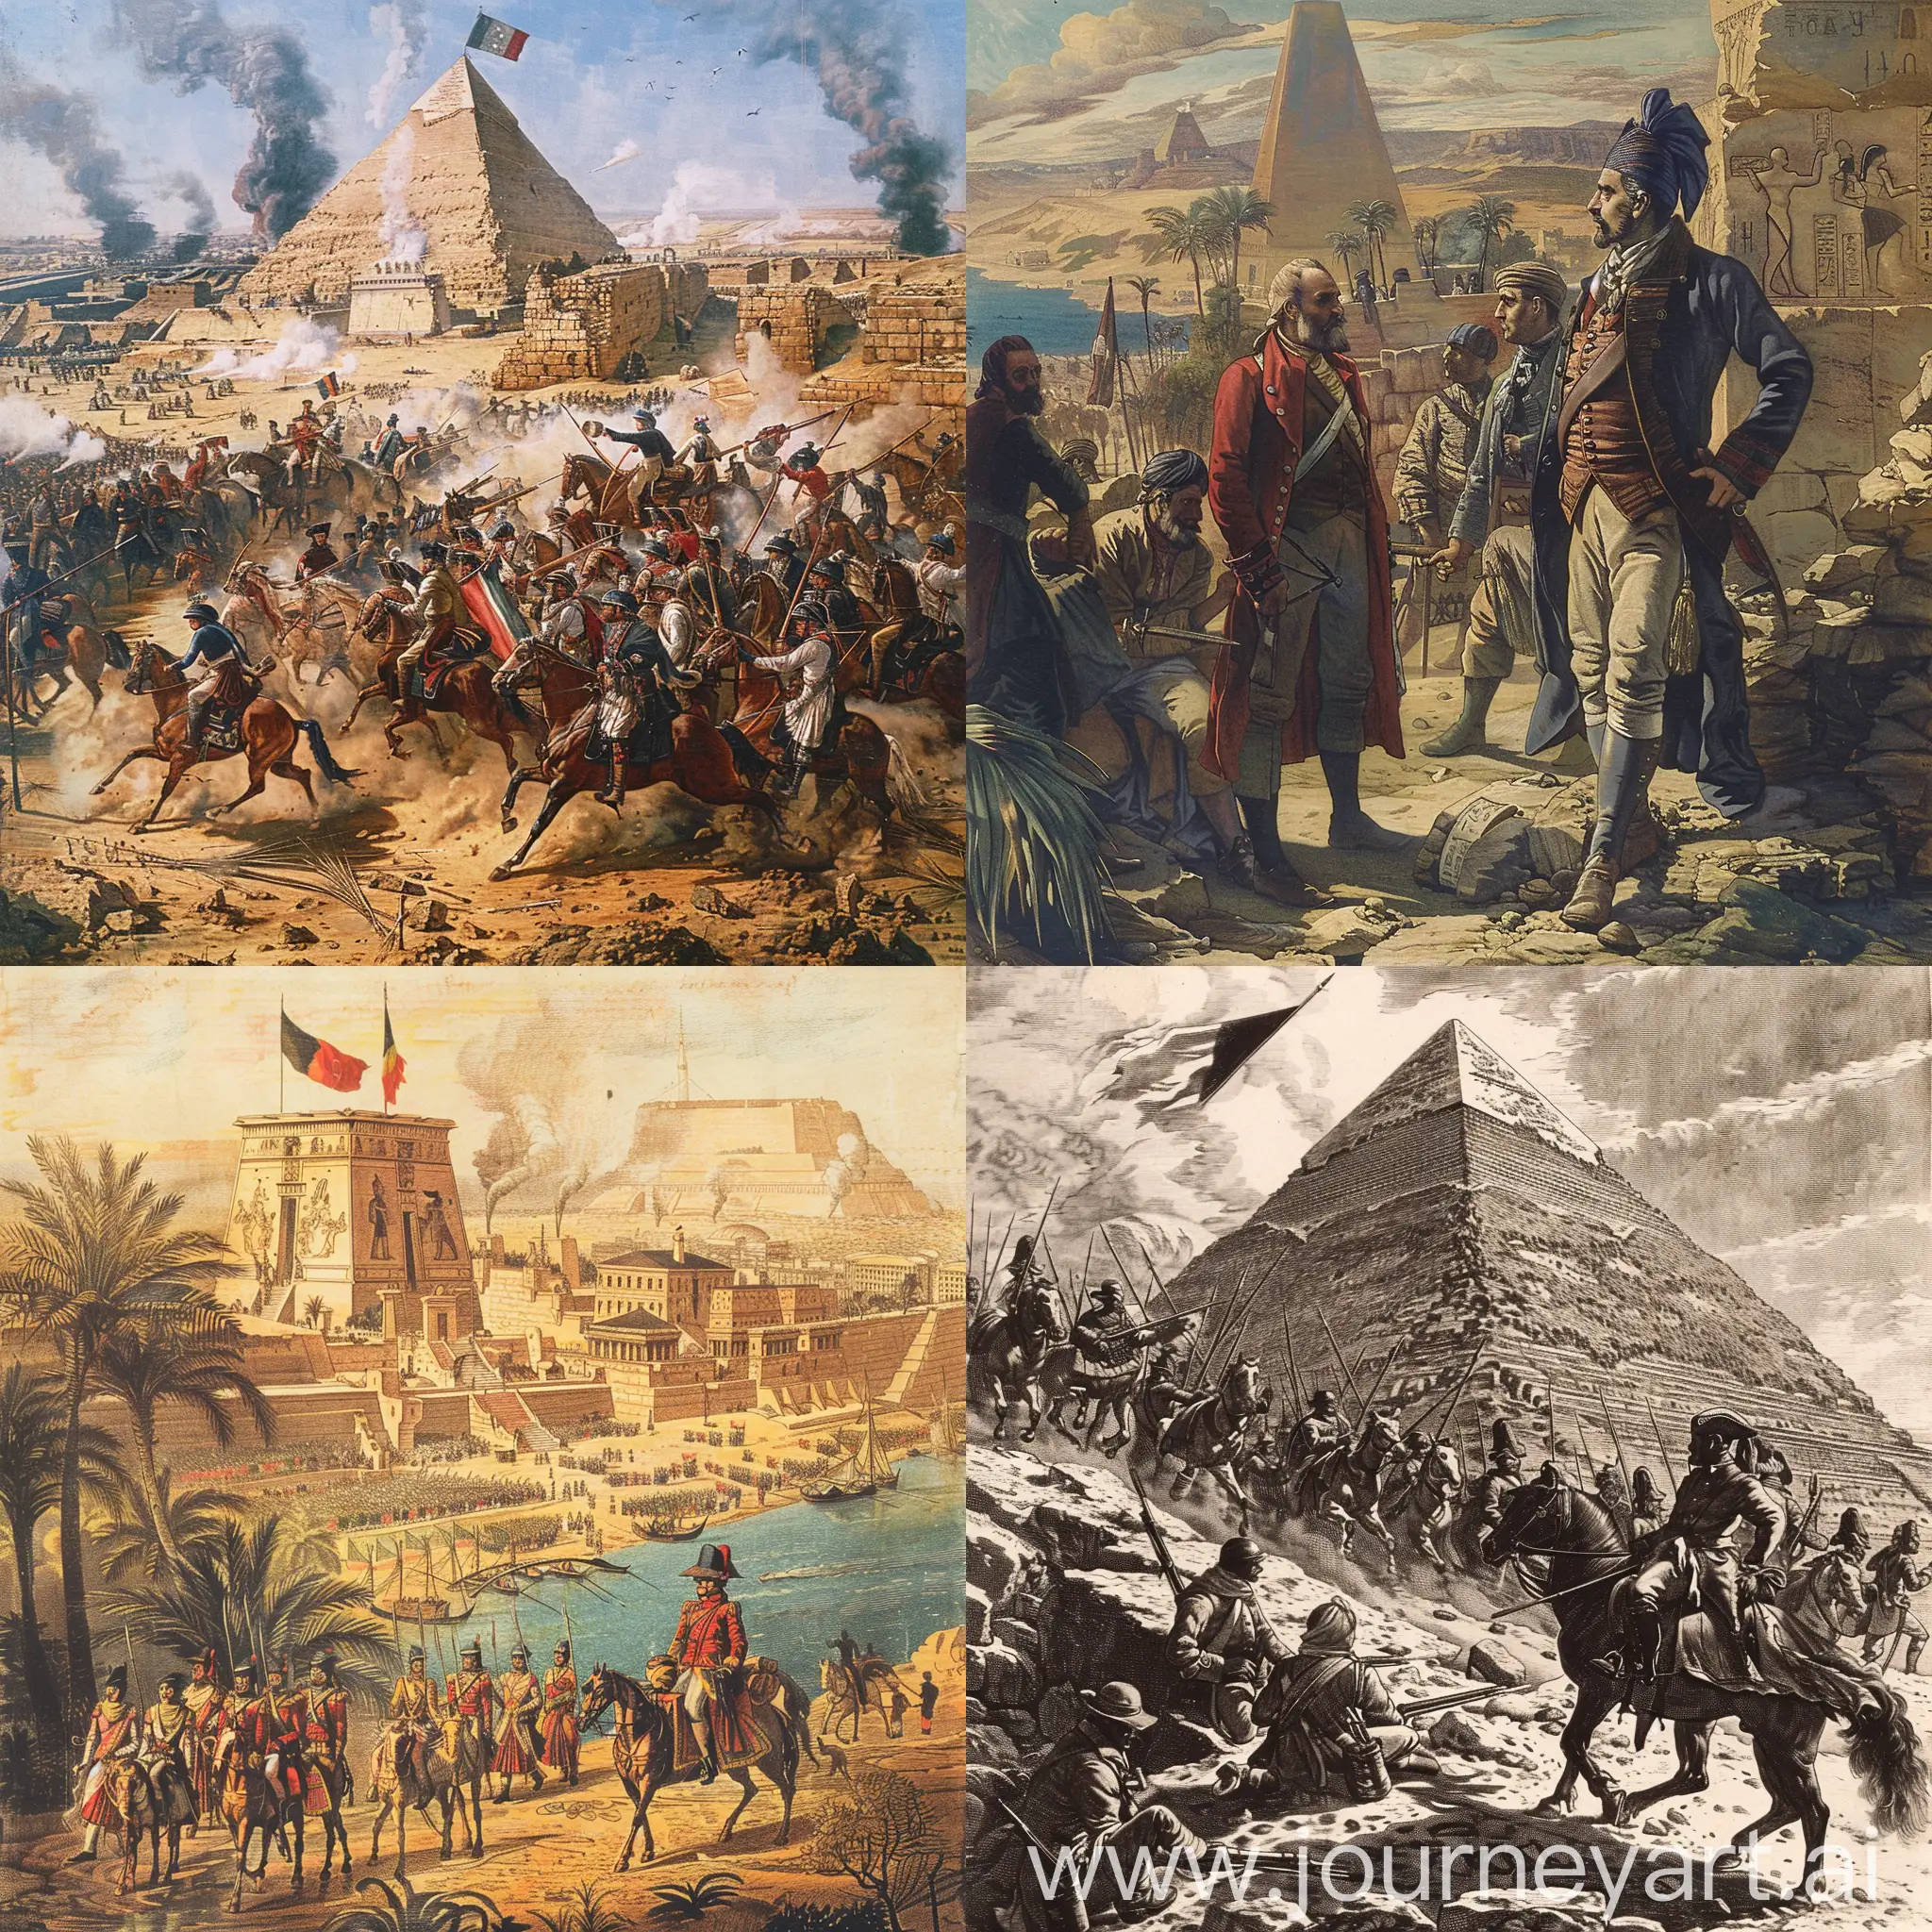 The events and consequences of the French Revolution gradually intertwined until Egypt's name emerged prominently on the world stage. To understand this context, one must first familiarize oneself with the historical background of France's ambition to seize Egypt and the inevitability of this idea crystallizing in the minds of leaders after the French Revolution, as will become evident in the following.
